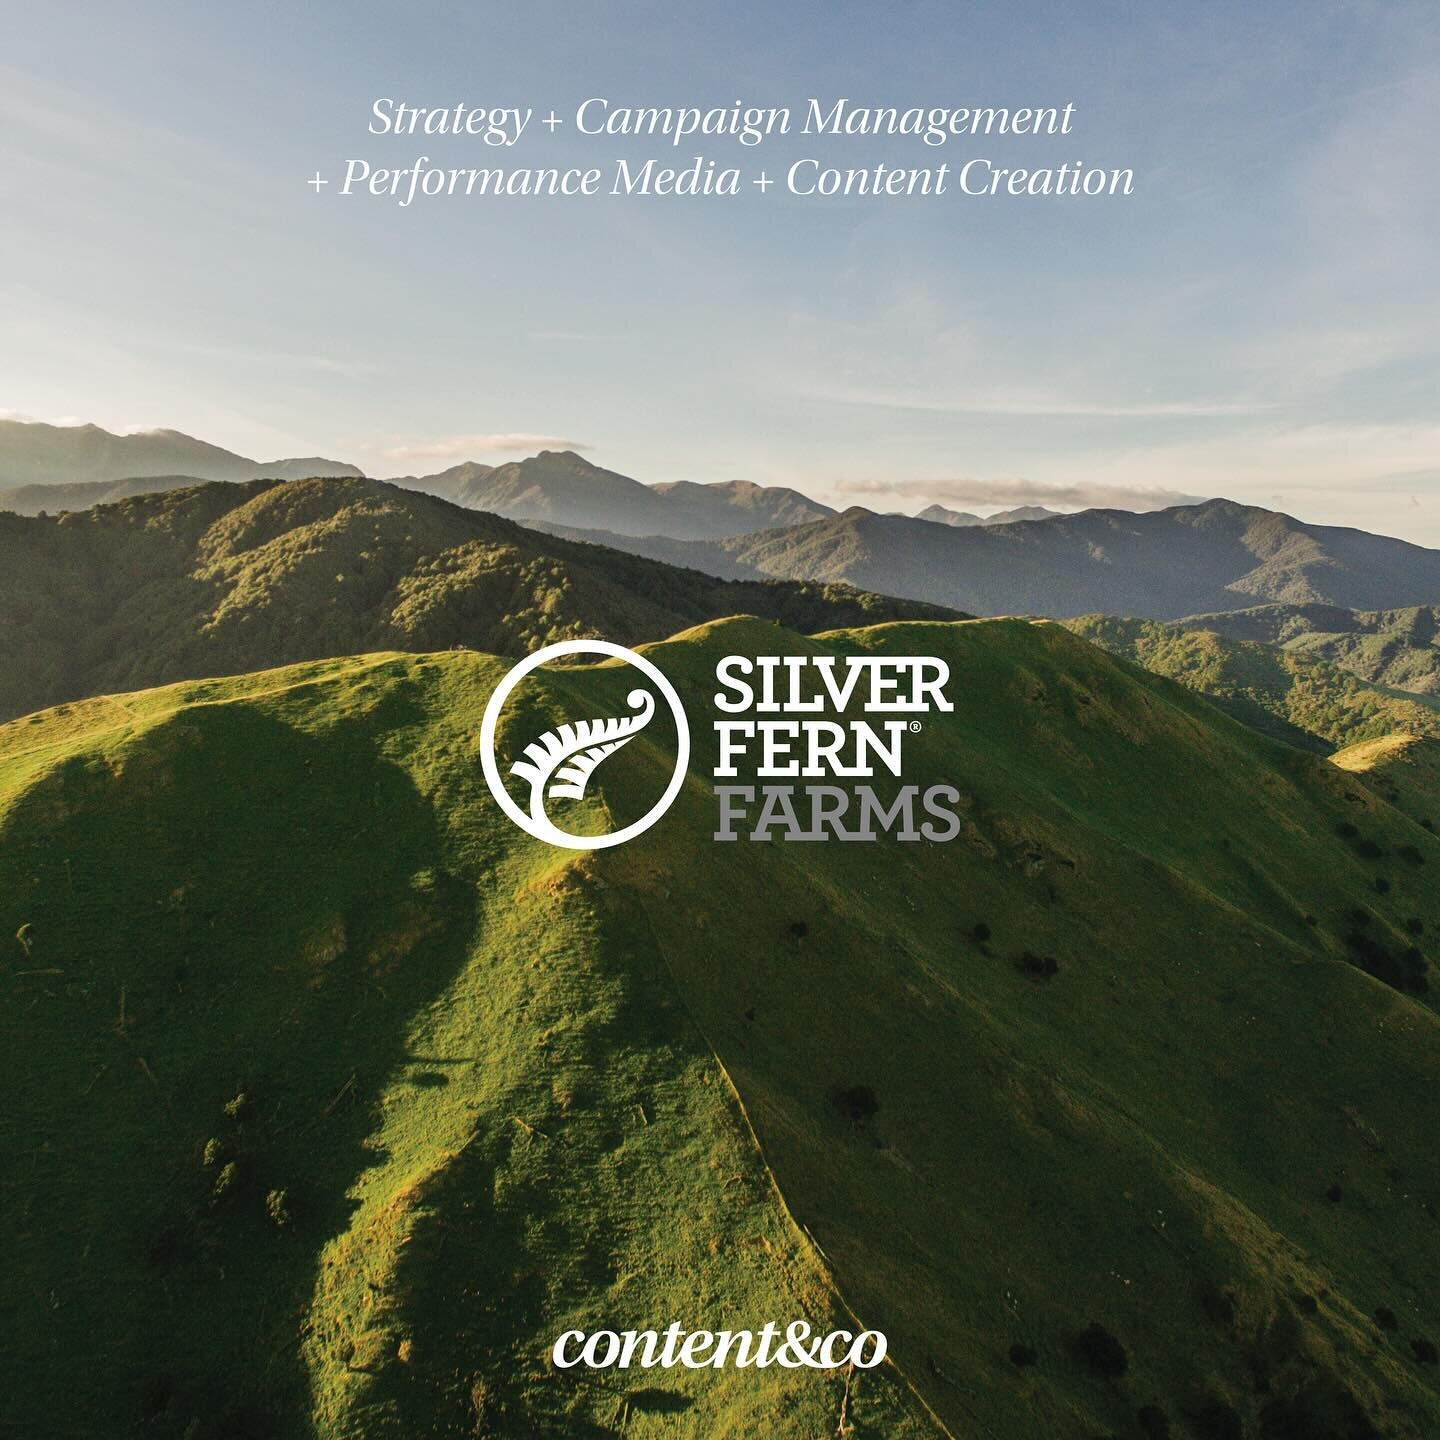 We're thrilled to share the 🌟glowing words from our long-standing client @silverfernfarms.

&quot;The content&amp;co team have worked with us for many years running our monthly social campaigns for the New Zealand market. They are such a great team 